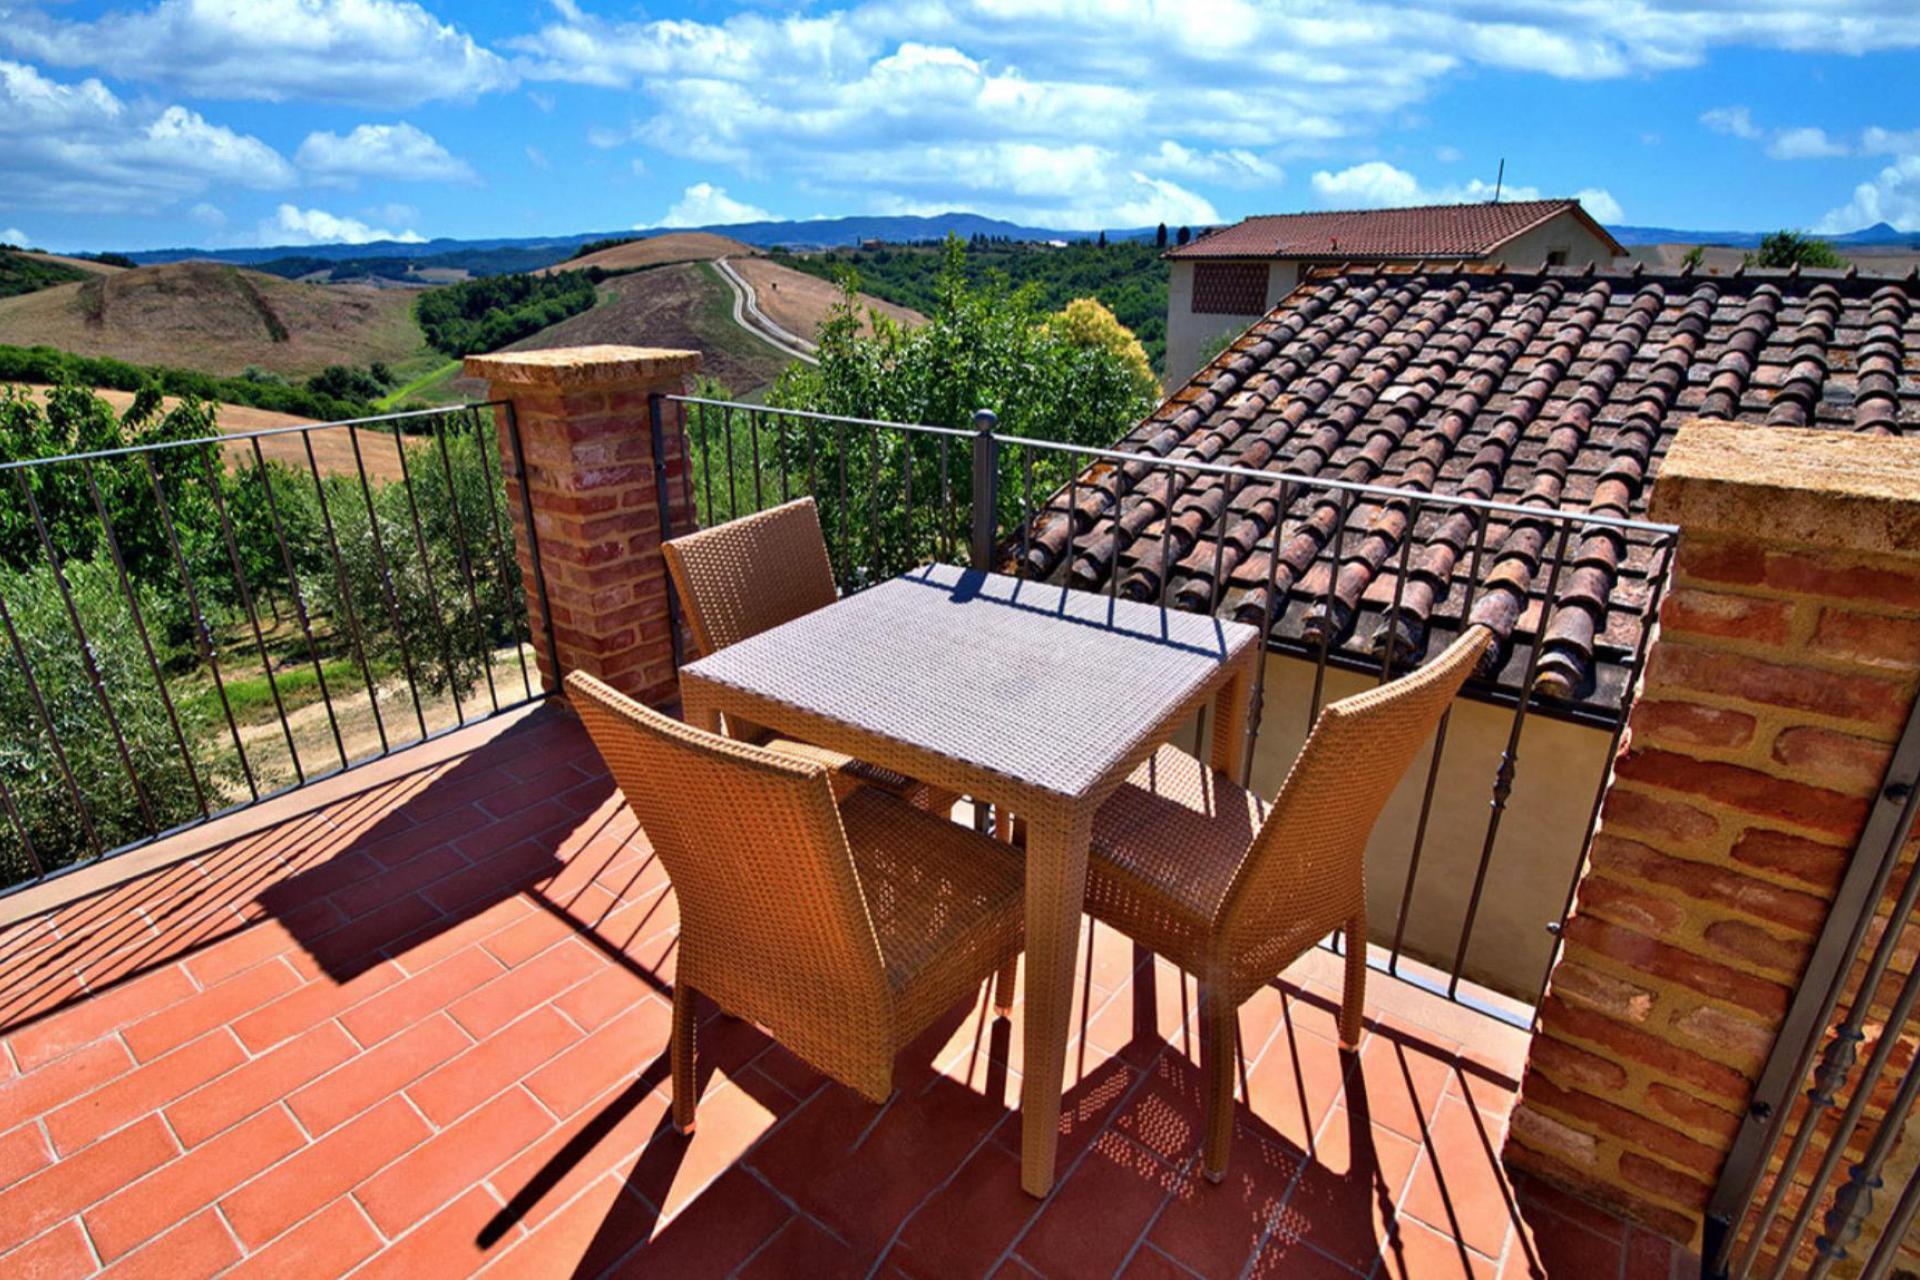 Agriturismo Tuscany Authentic agriturismo in Tuscany with great views